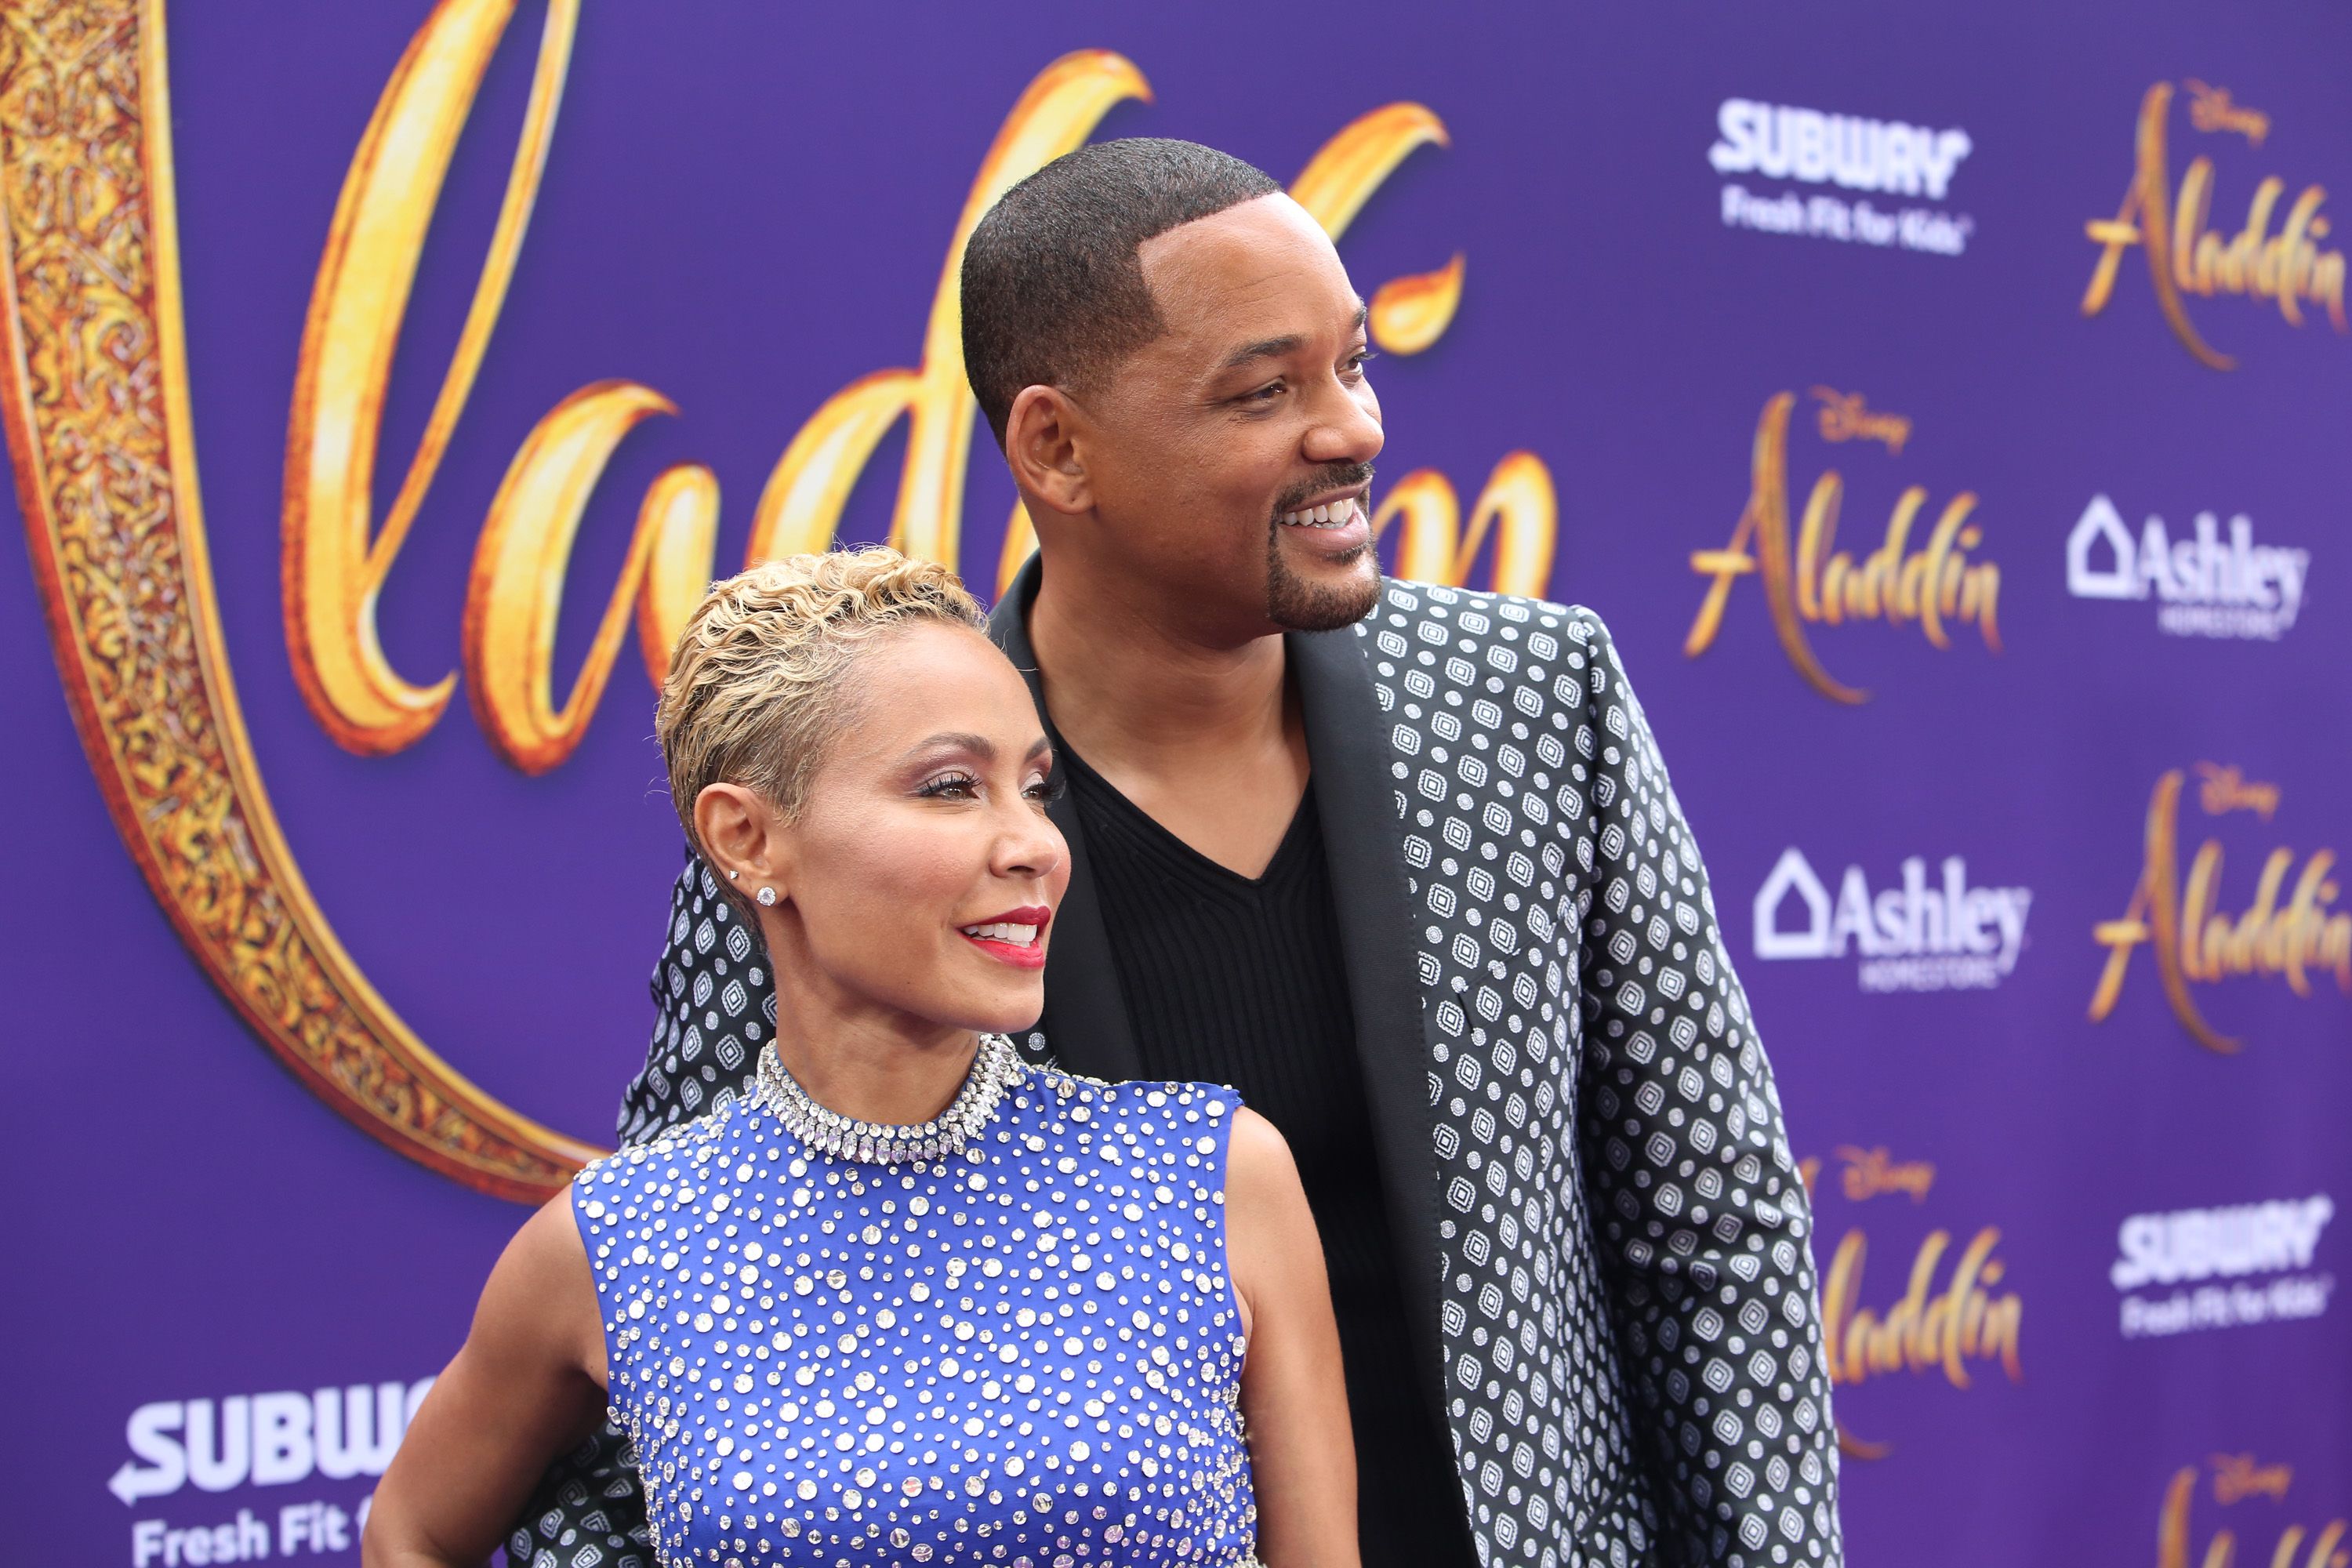 Jada Pinkett Smith and Will Smith at the world premiere of Disney's "Aladdin" at the El Capitan Theater in Hollywood CA | Photo: Getty Images 